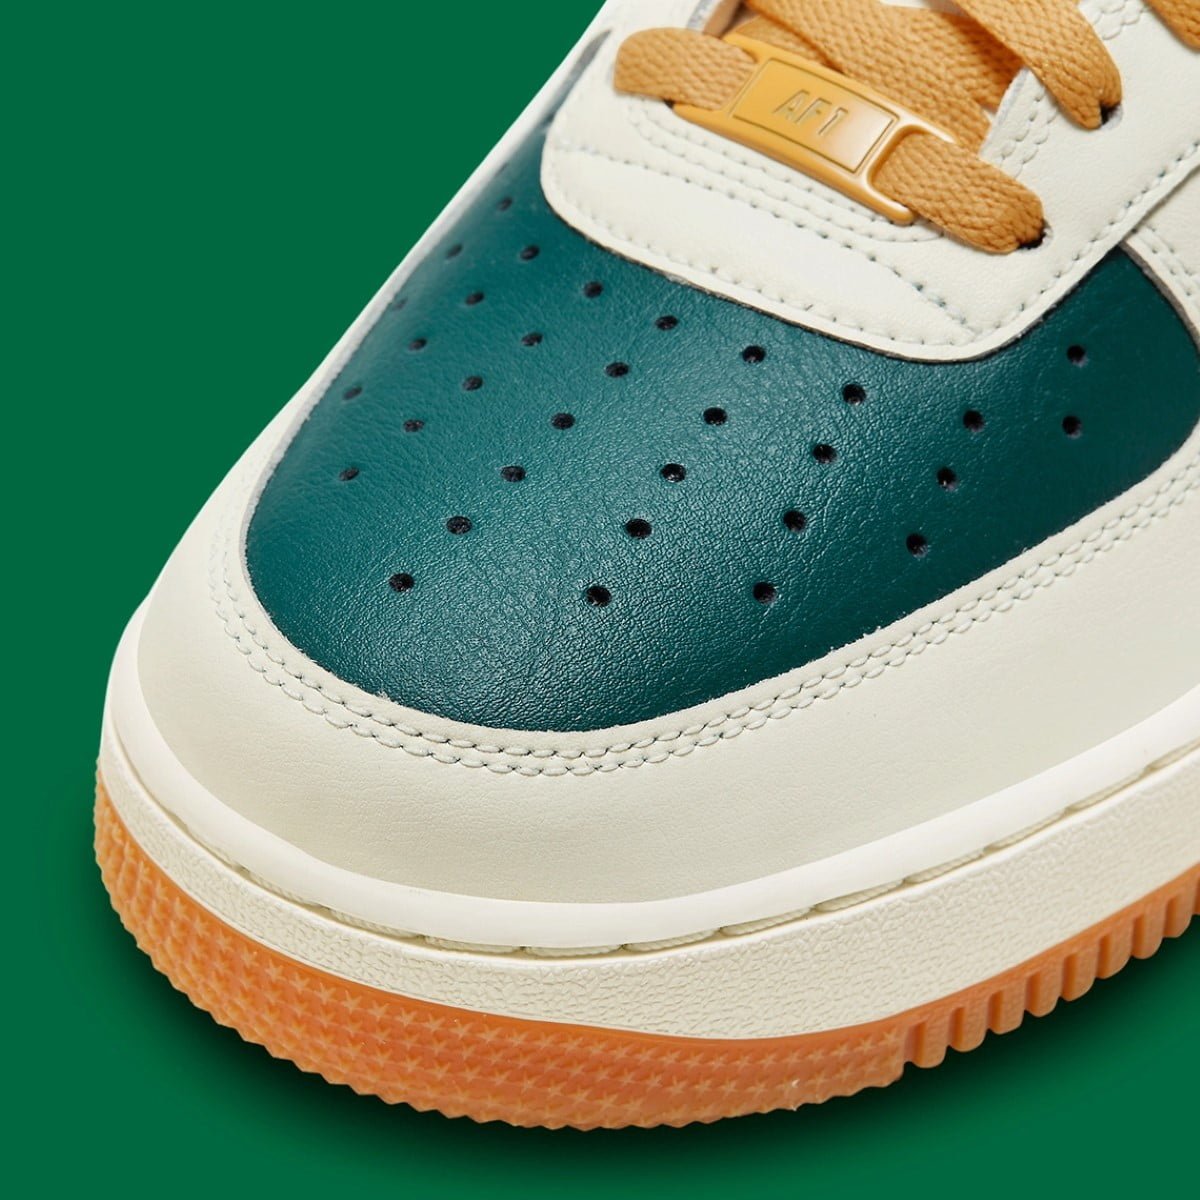 Nike Air Force 1 Low "il Tricolore"